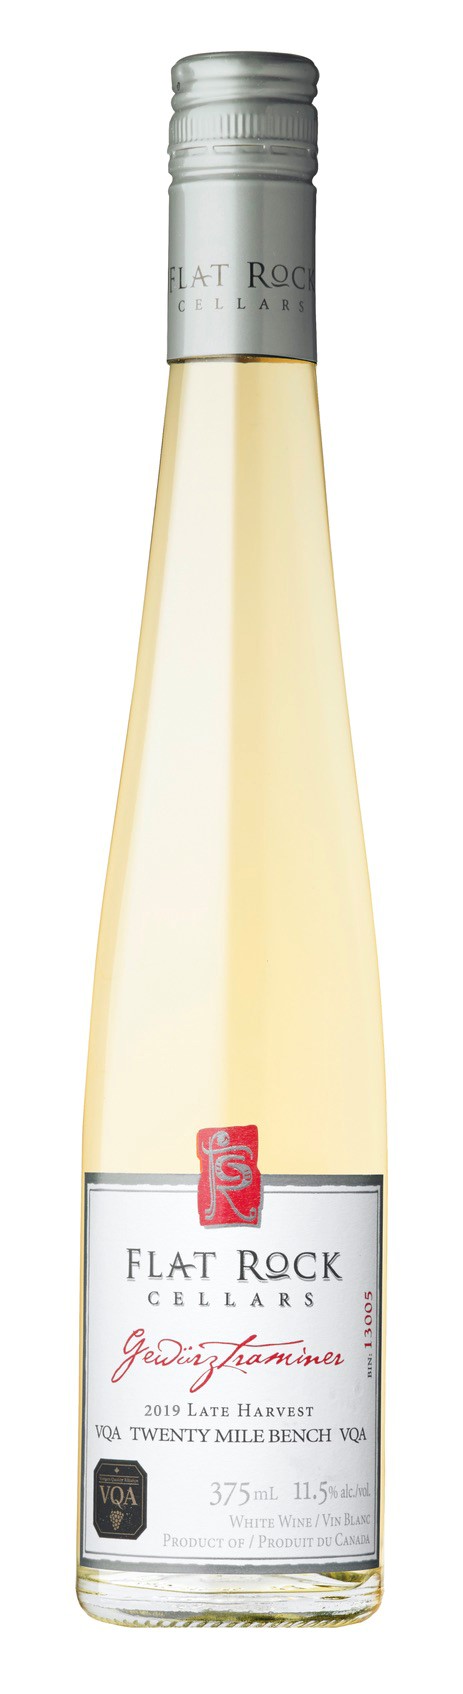 Product Image for 2019 Late Harvest Gewürztraminer